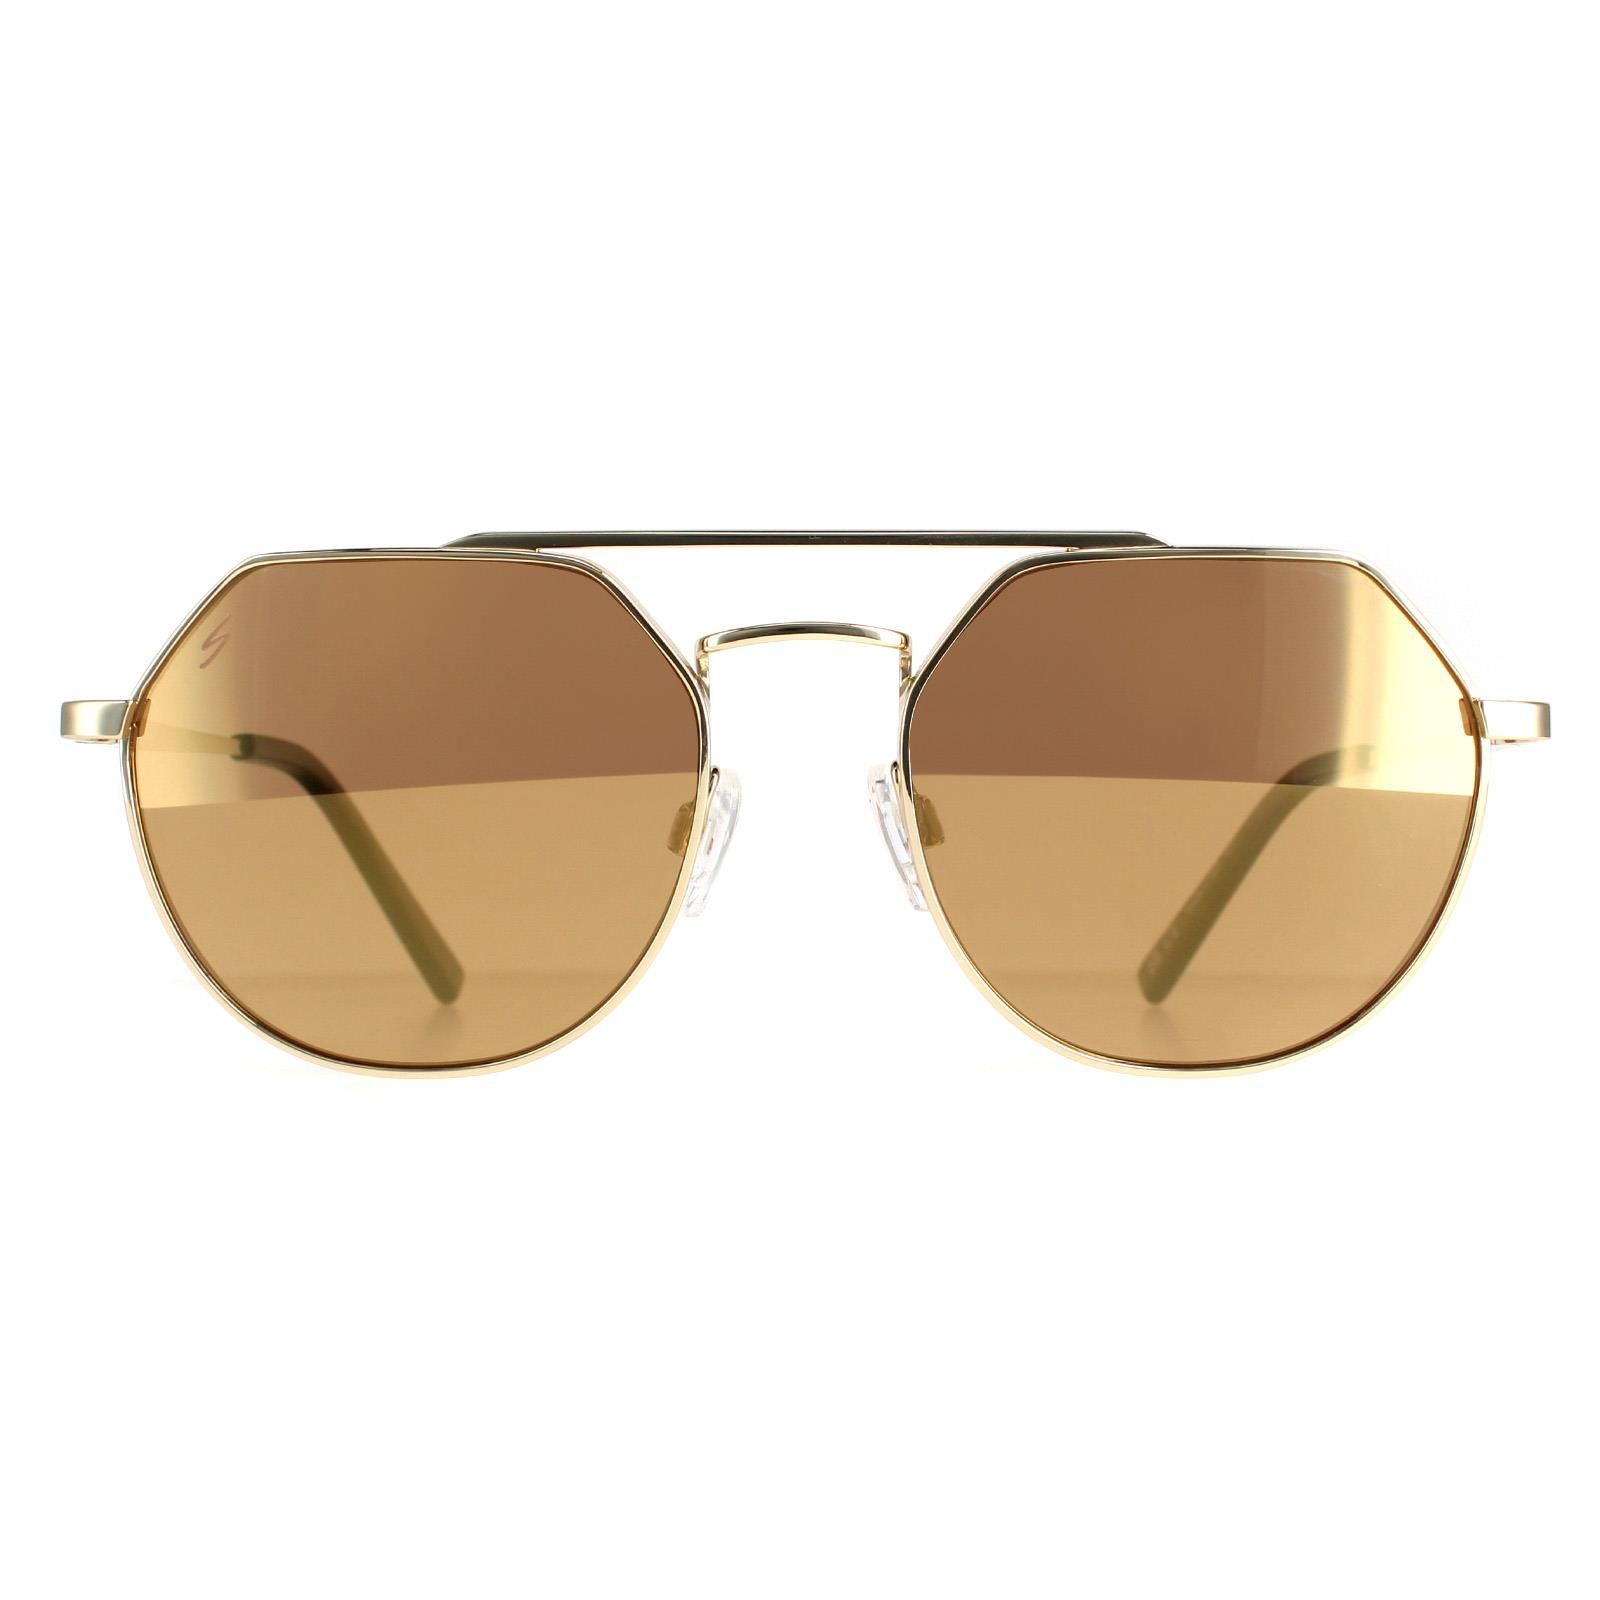 Serengeti Aviator Unisex Shiny Light Gold Saturn Drivers Gold Polarized Shelby  Shelby are lightweight metal pilot style with a geometric top frame design. Spring hinges and adjustable nose pieces give added comfort. Serengeti's amazing photochromic lenses which adapt to different light conditions complete the awesome package.